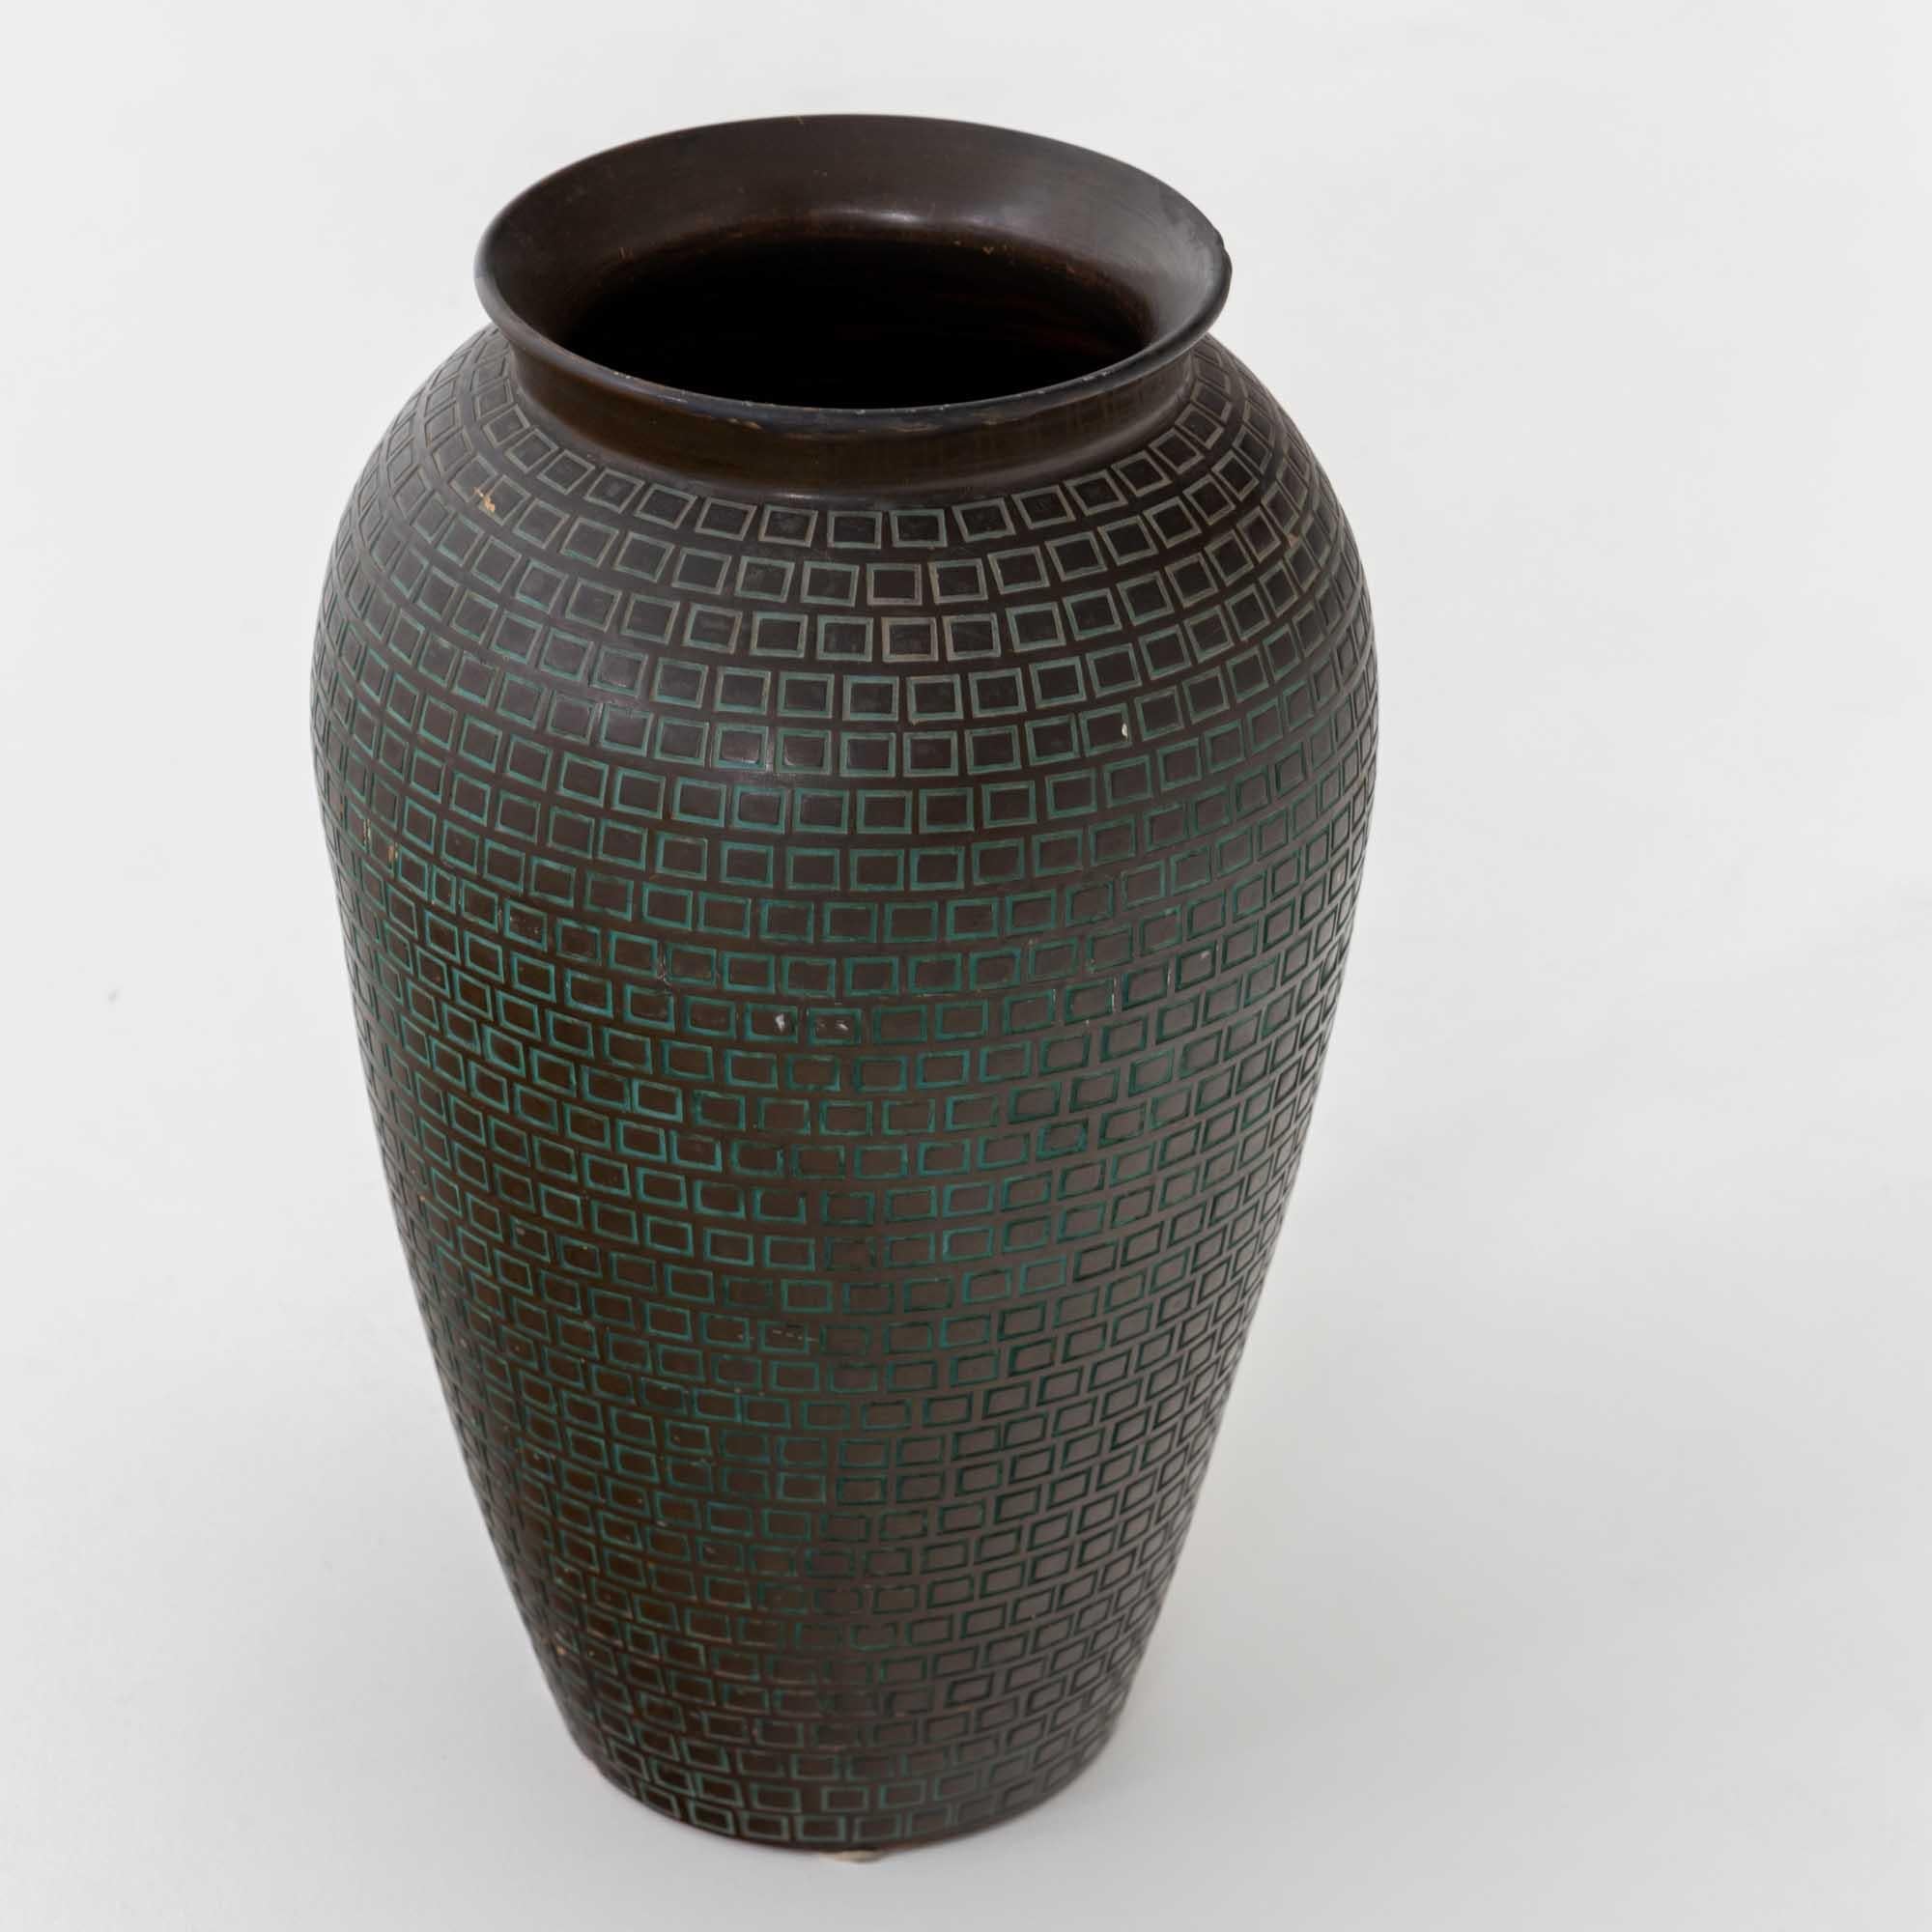 Large ceramic vase with conical wall decorated with small rectangles whose notches are coloured in turquoise. Signed Batignani Italy on the bottom.